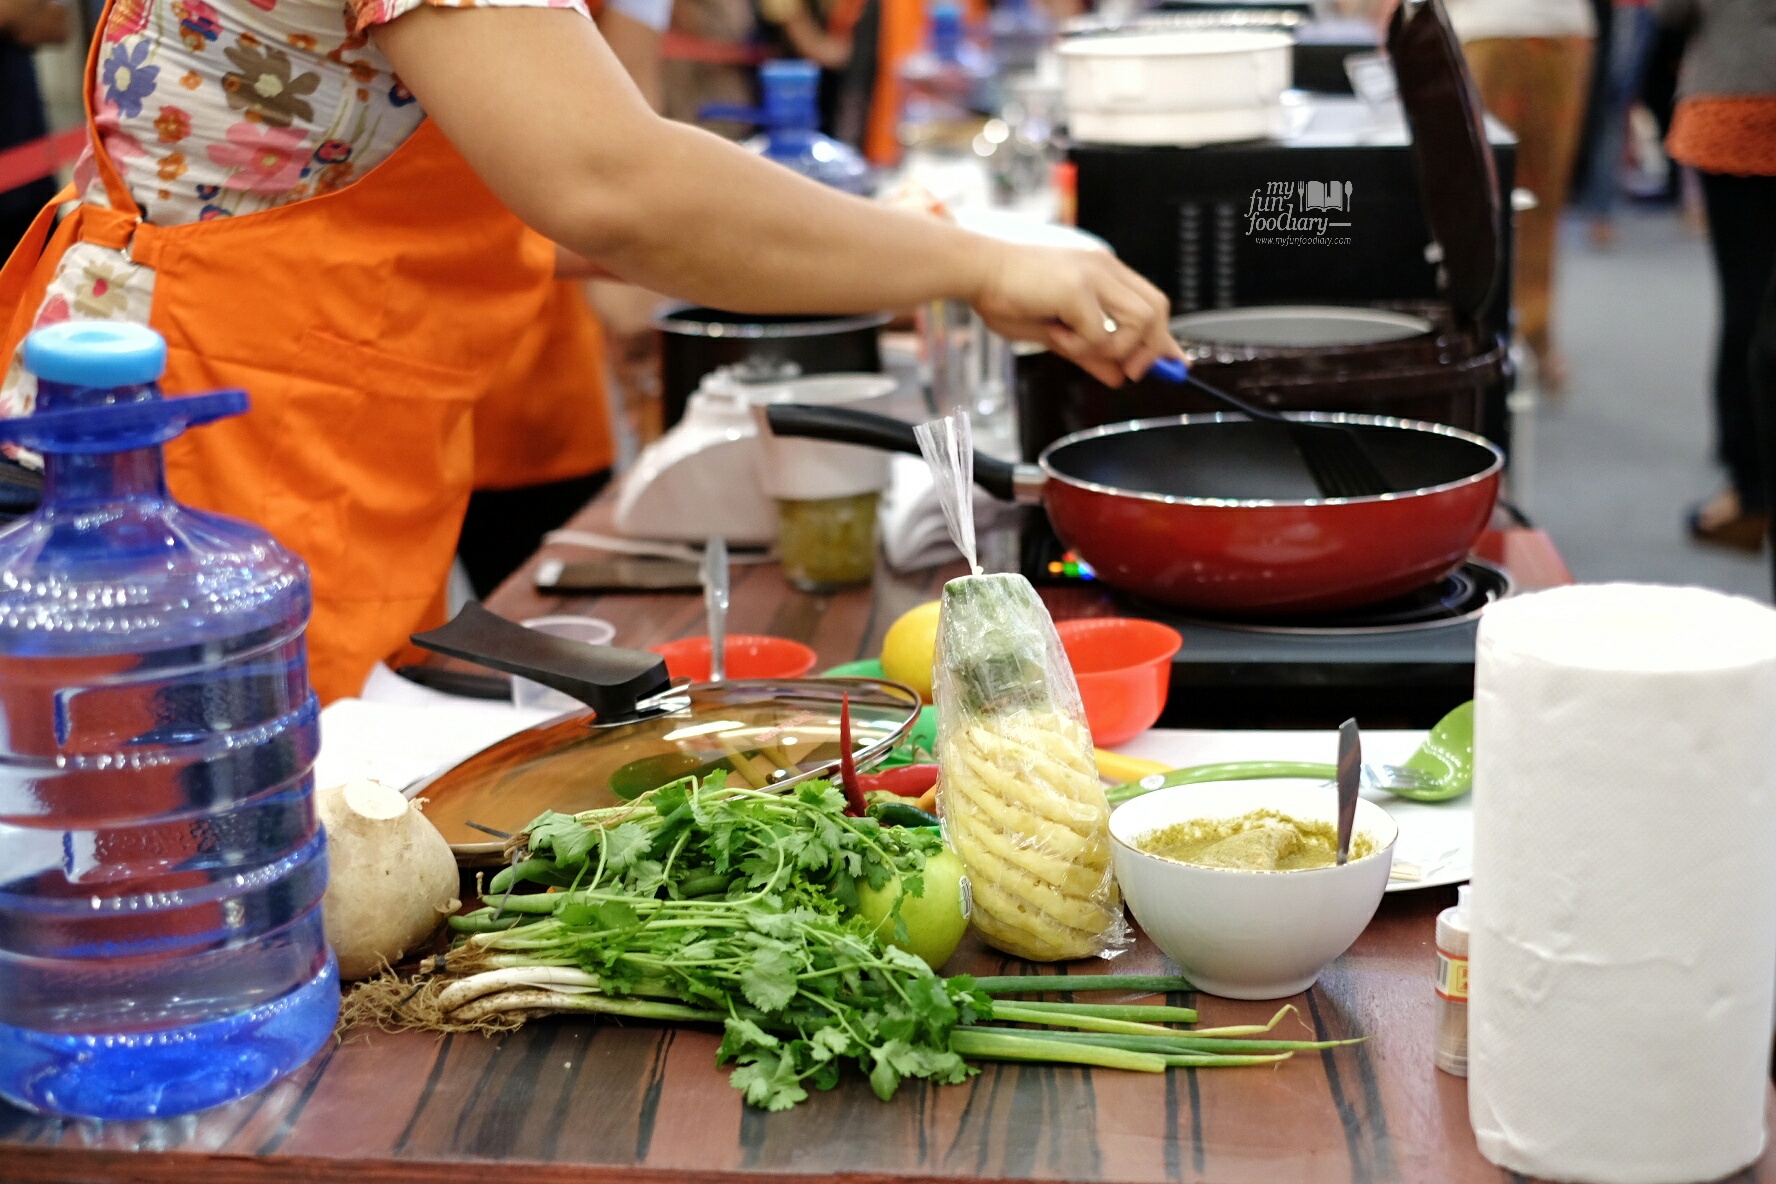 Behind the scene Cooking Competition by Myfunfoodiary